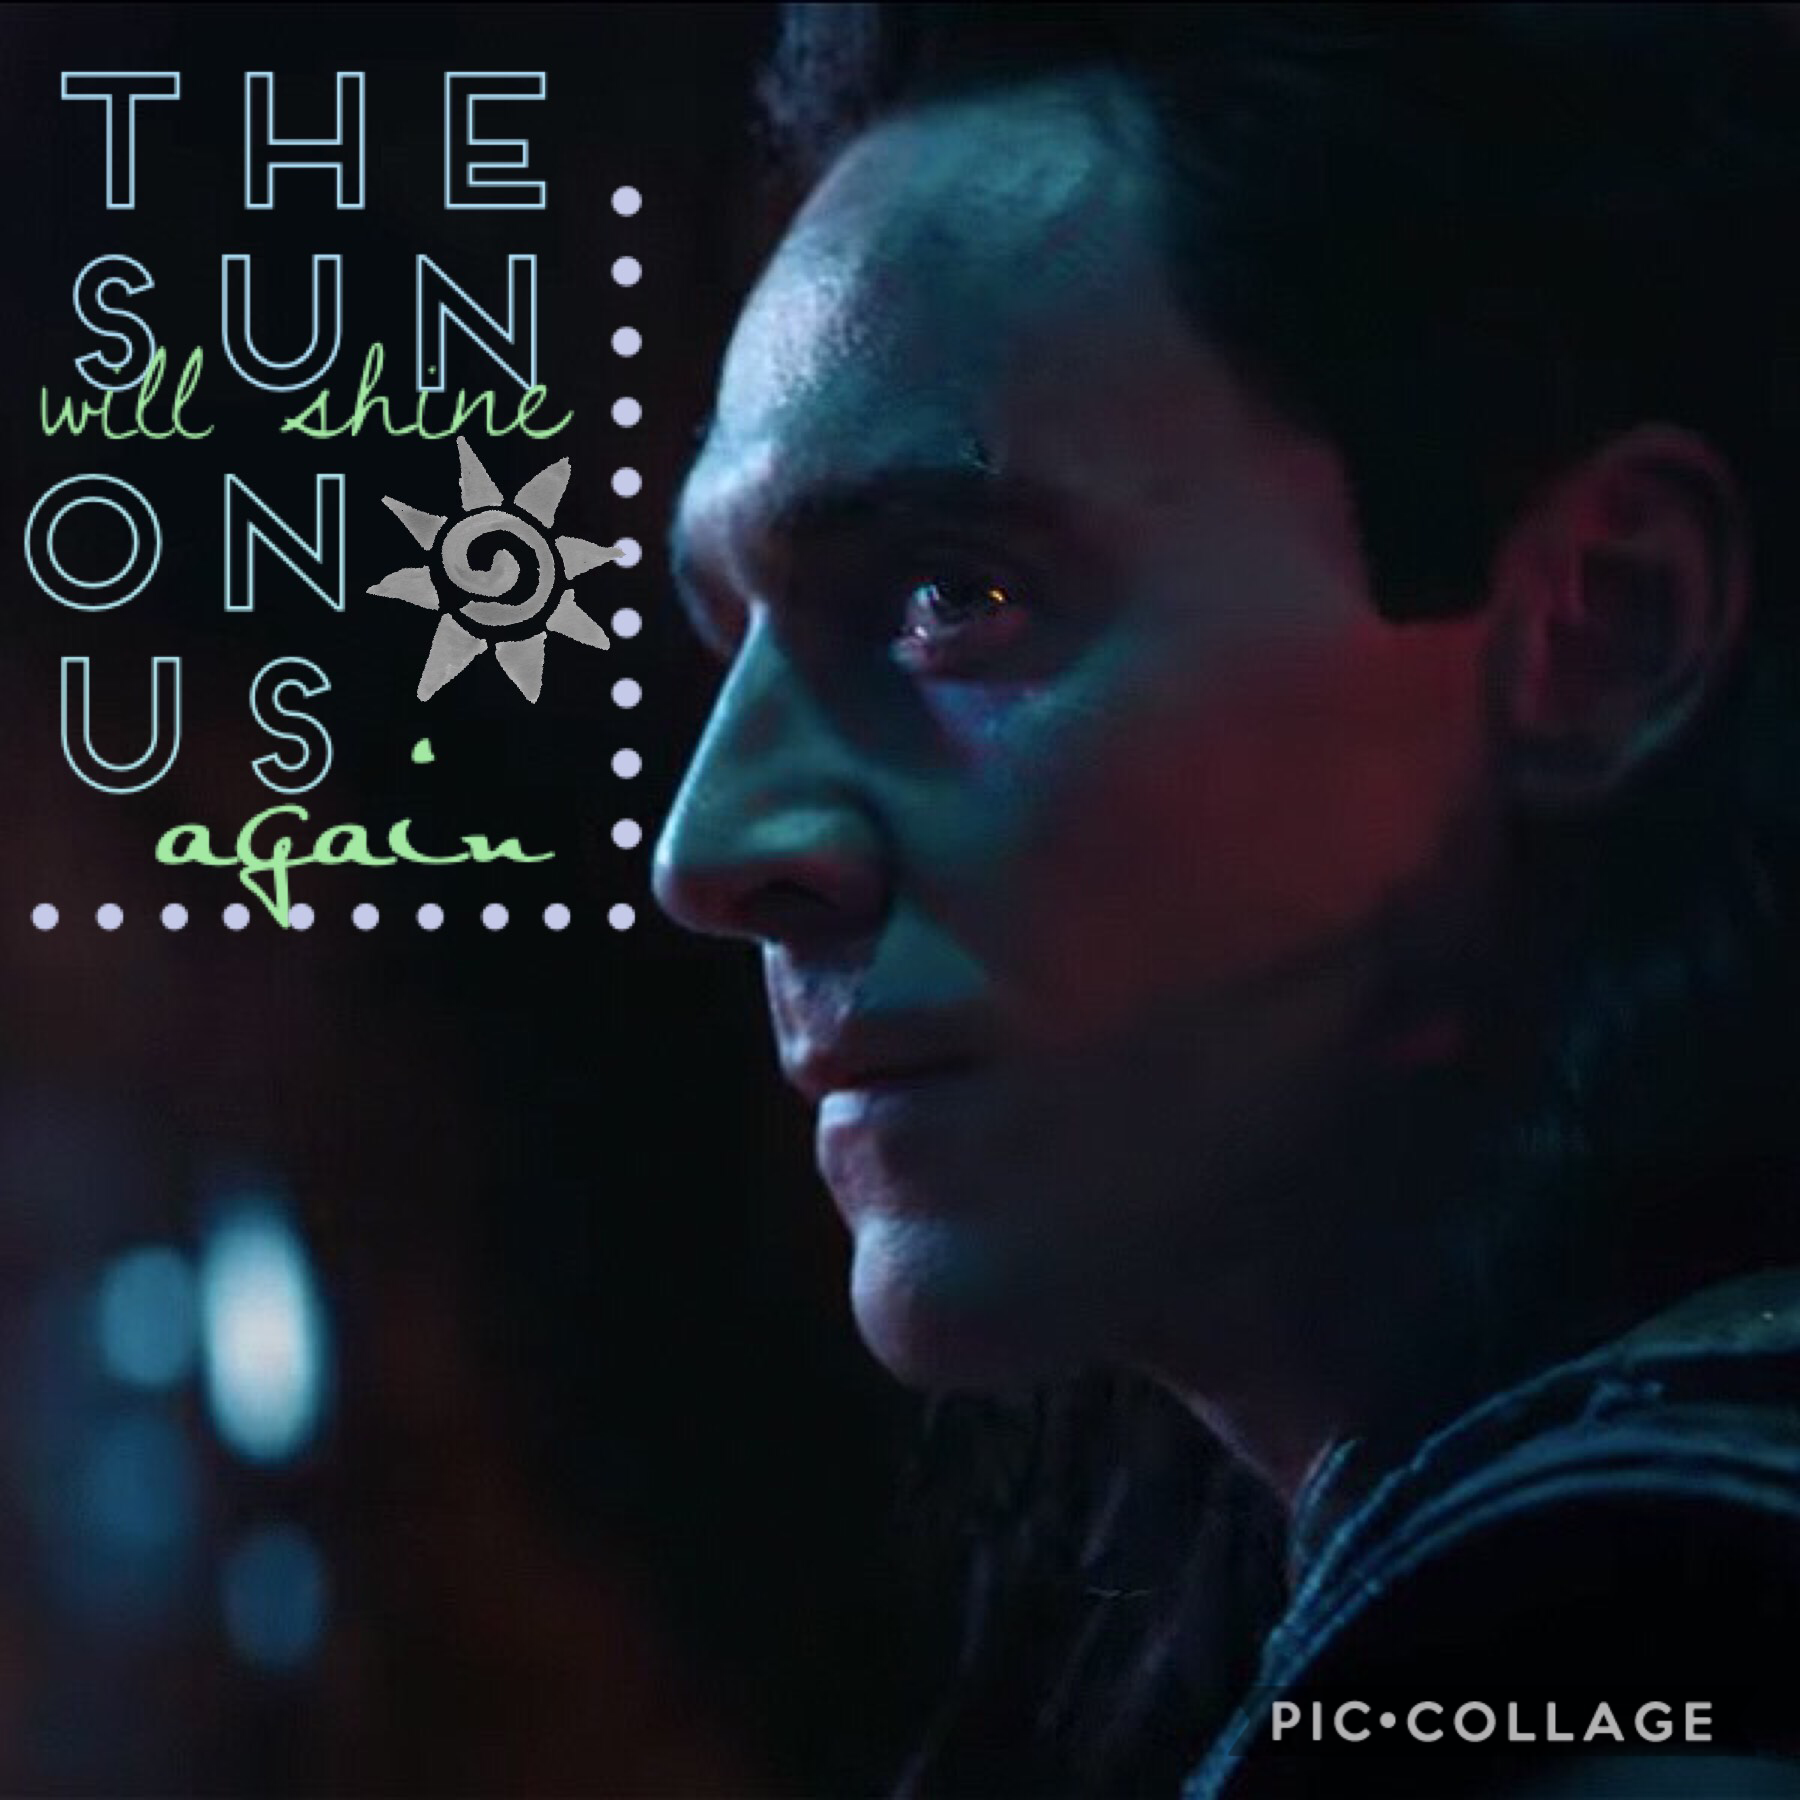 Loki post... again! (Tap)
Anyone else angry/disappointed with what marvel did with Loki in infinity war? 